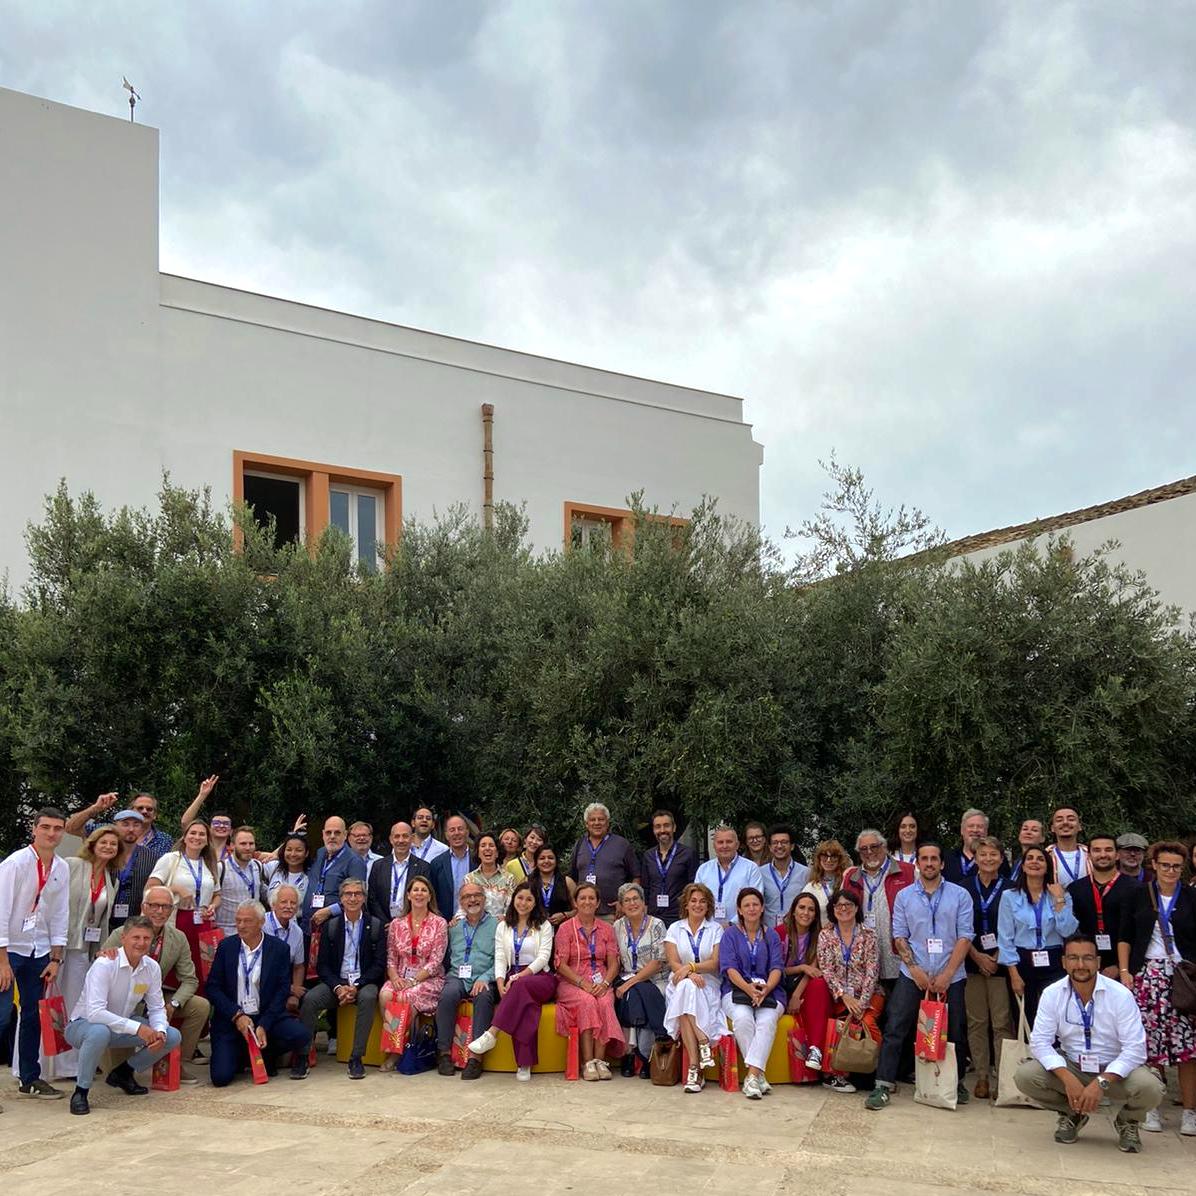 A special thanks to the jurors of the Concours Mondial de Bruxelles 2022 for all the special moments collected today at our Marsala Estate! @concoursmondial #DonnafugataWine #CMB2022